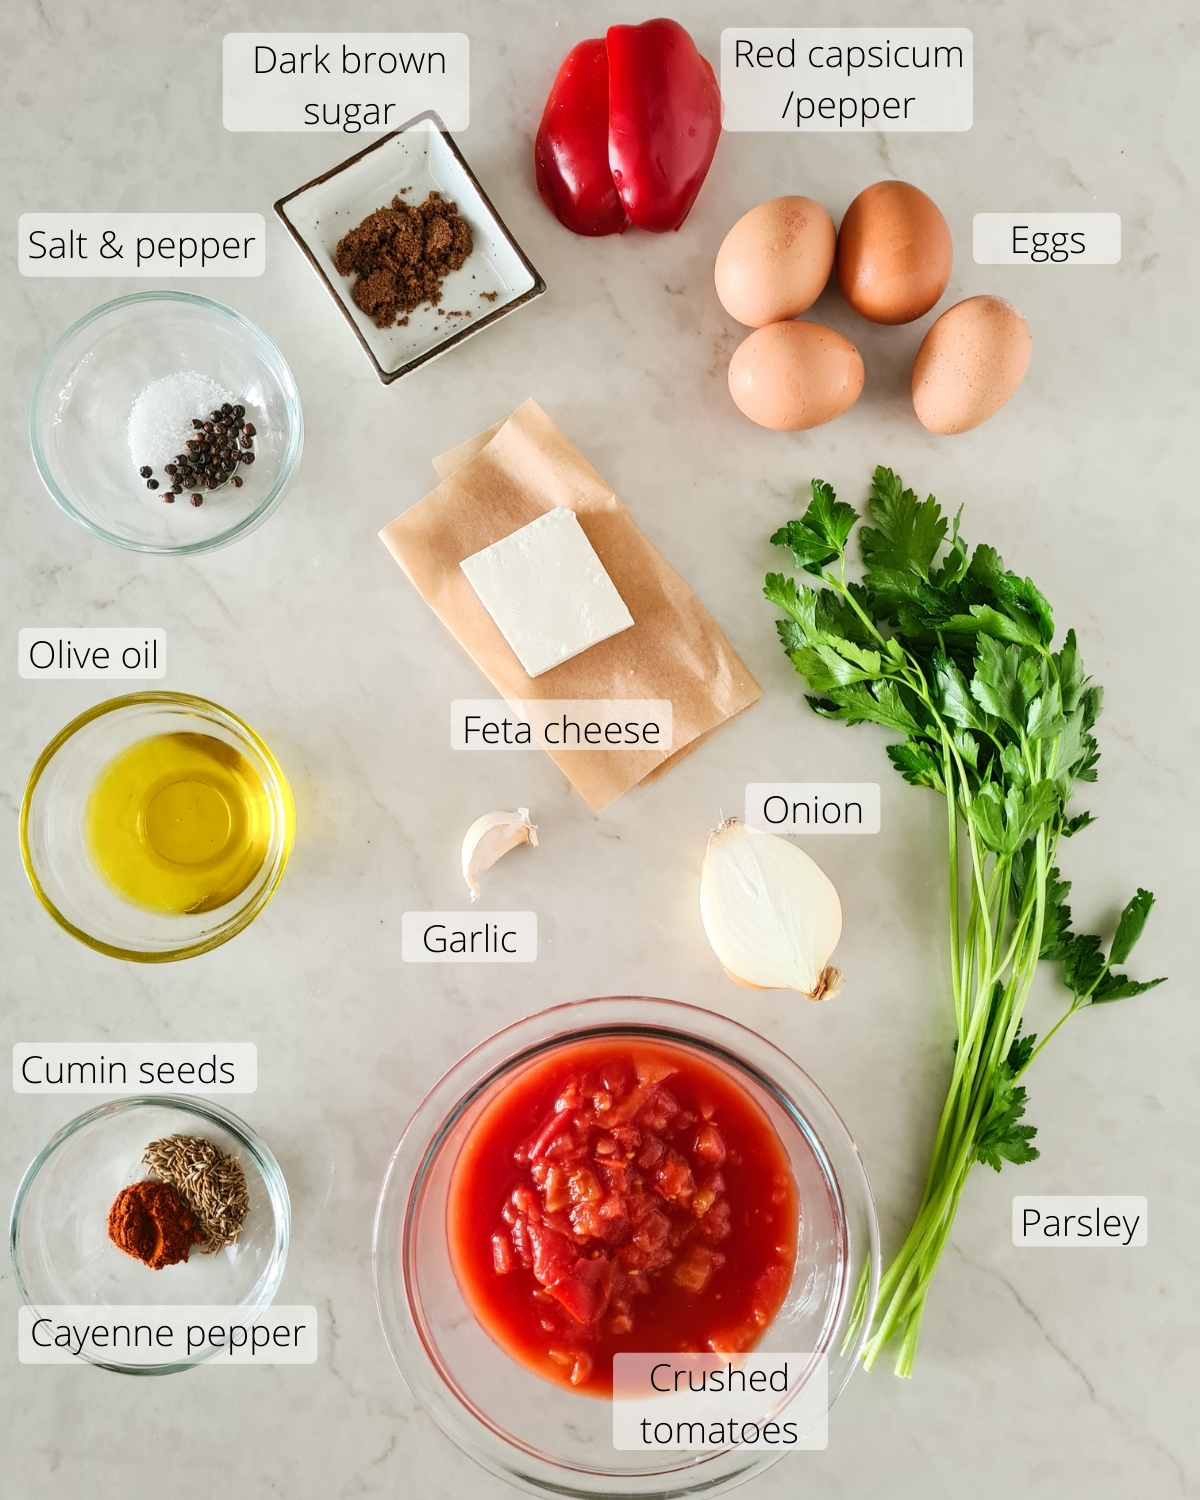 All ingredients required for shakshuka with feta